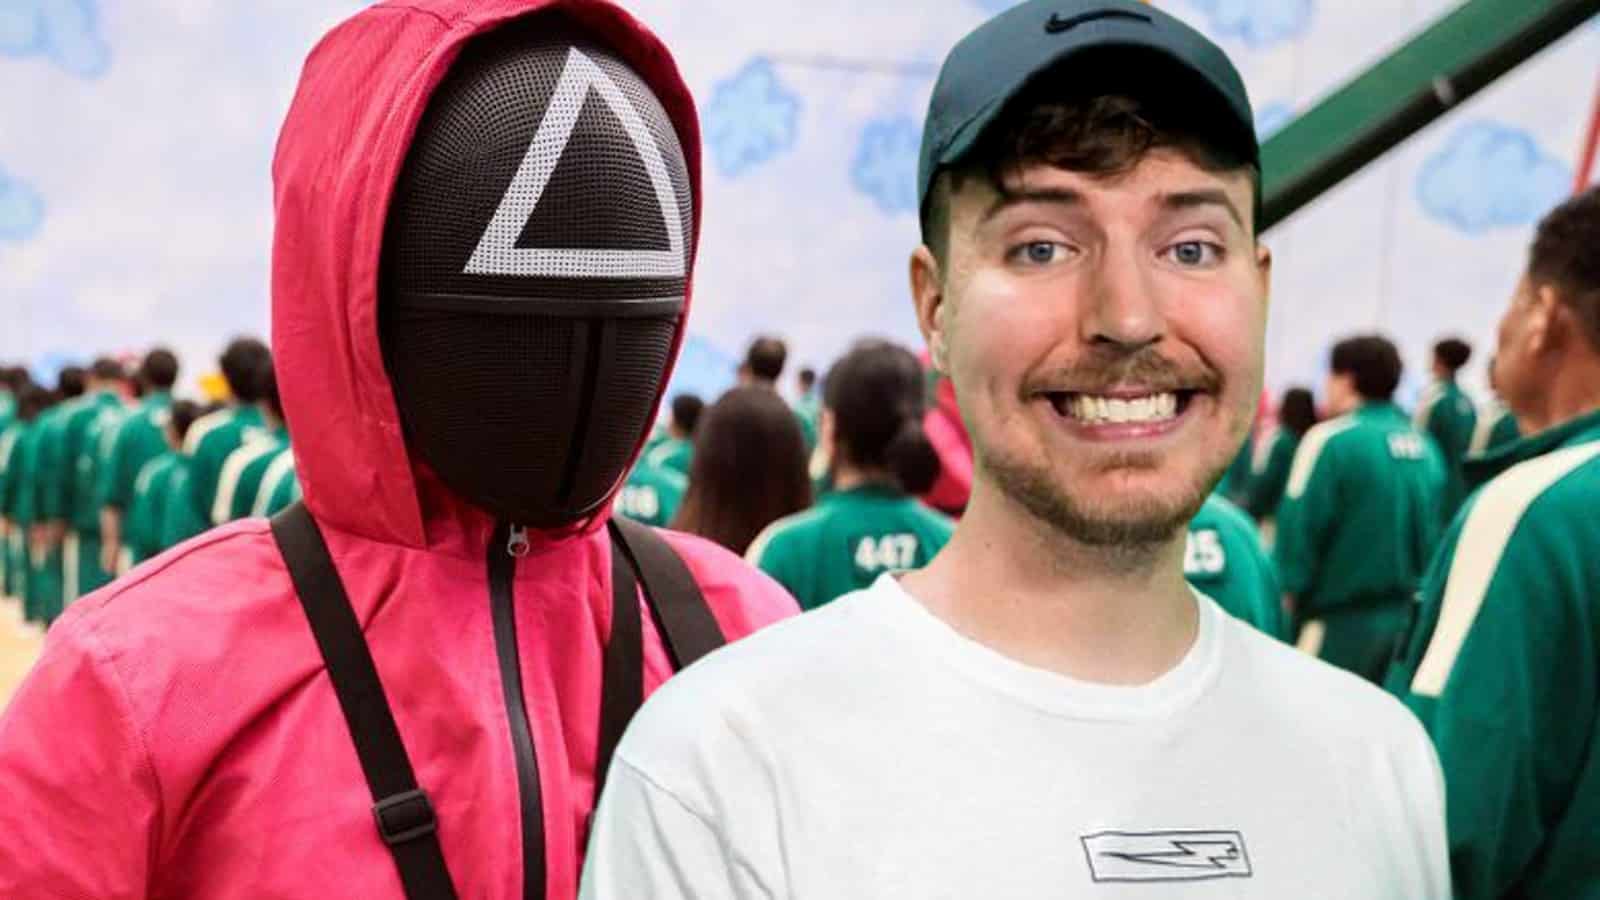 MrBeast next to a guard from Squid Game